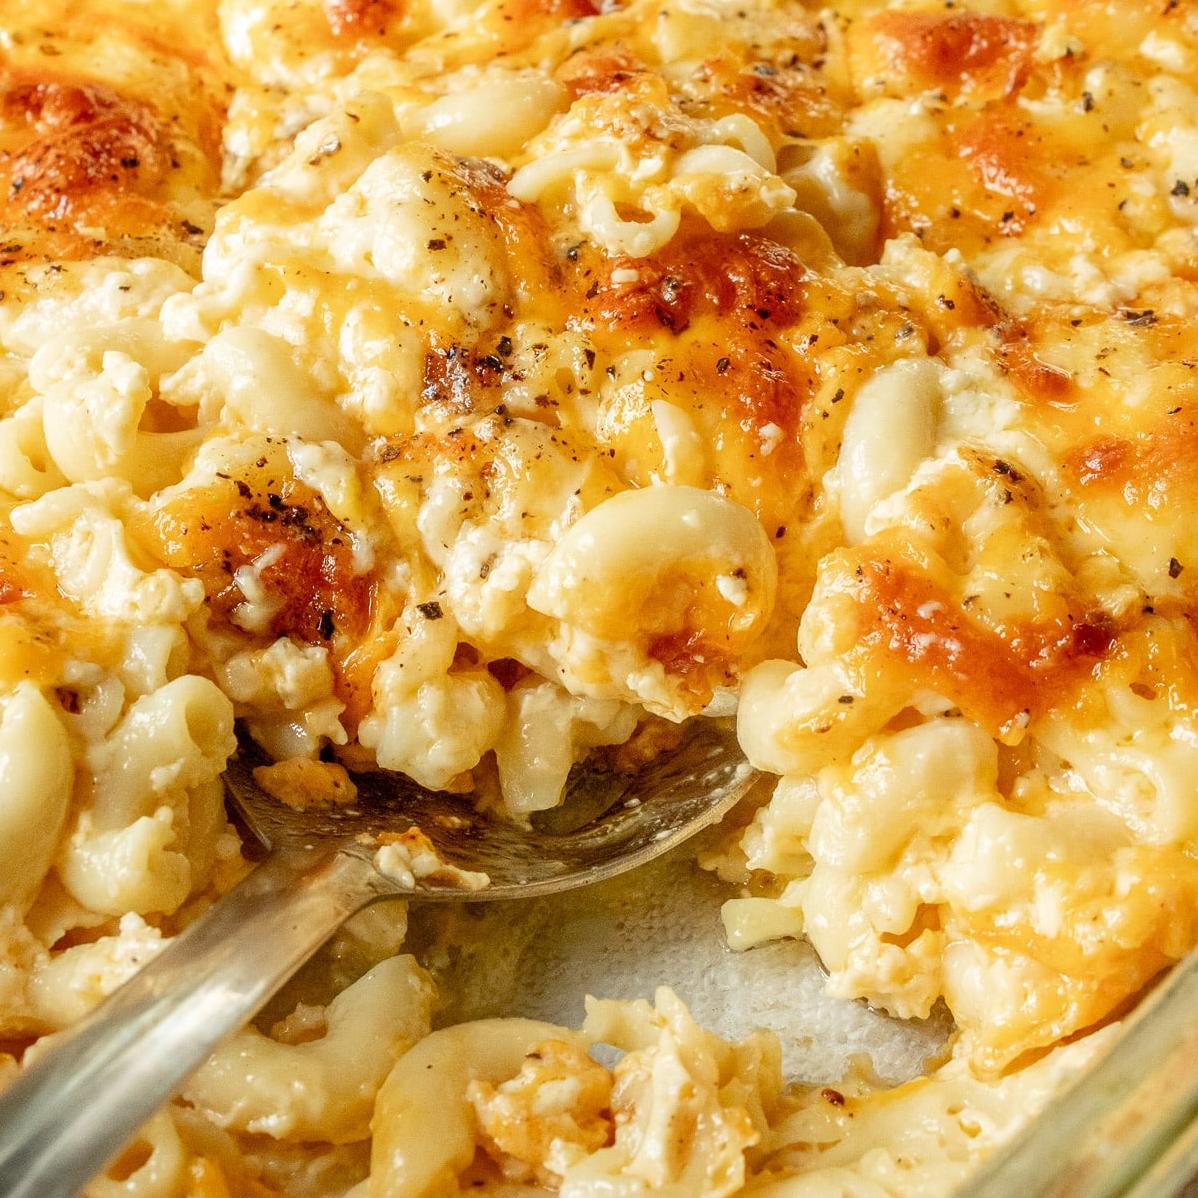  Comfort food at its finest: Southern-style mac n cheese.